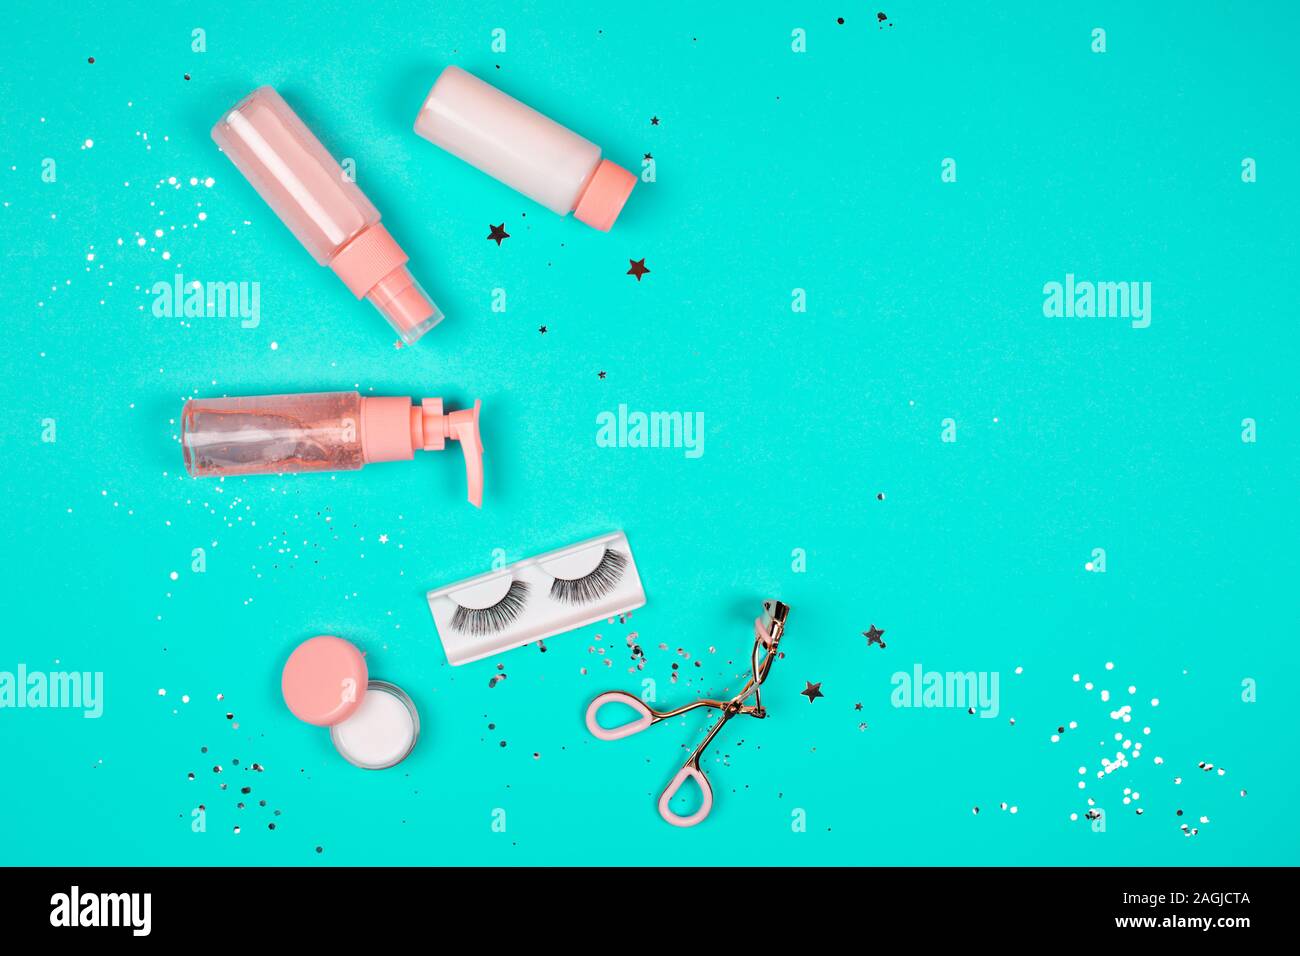 Care cosmetics on a trendy green background. Flat lay style. Stock Photo